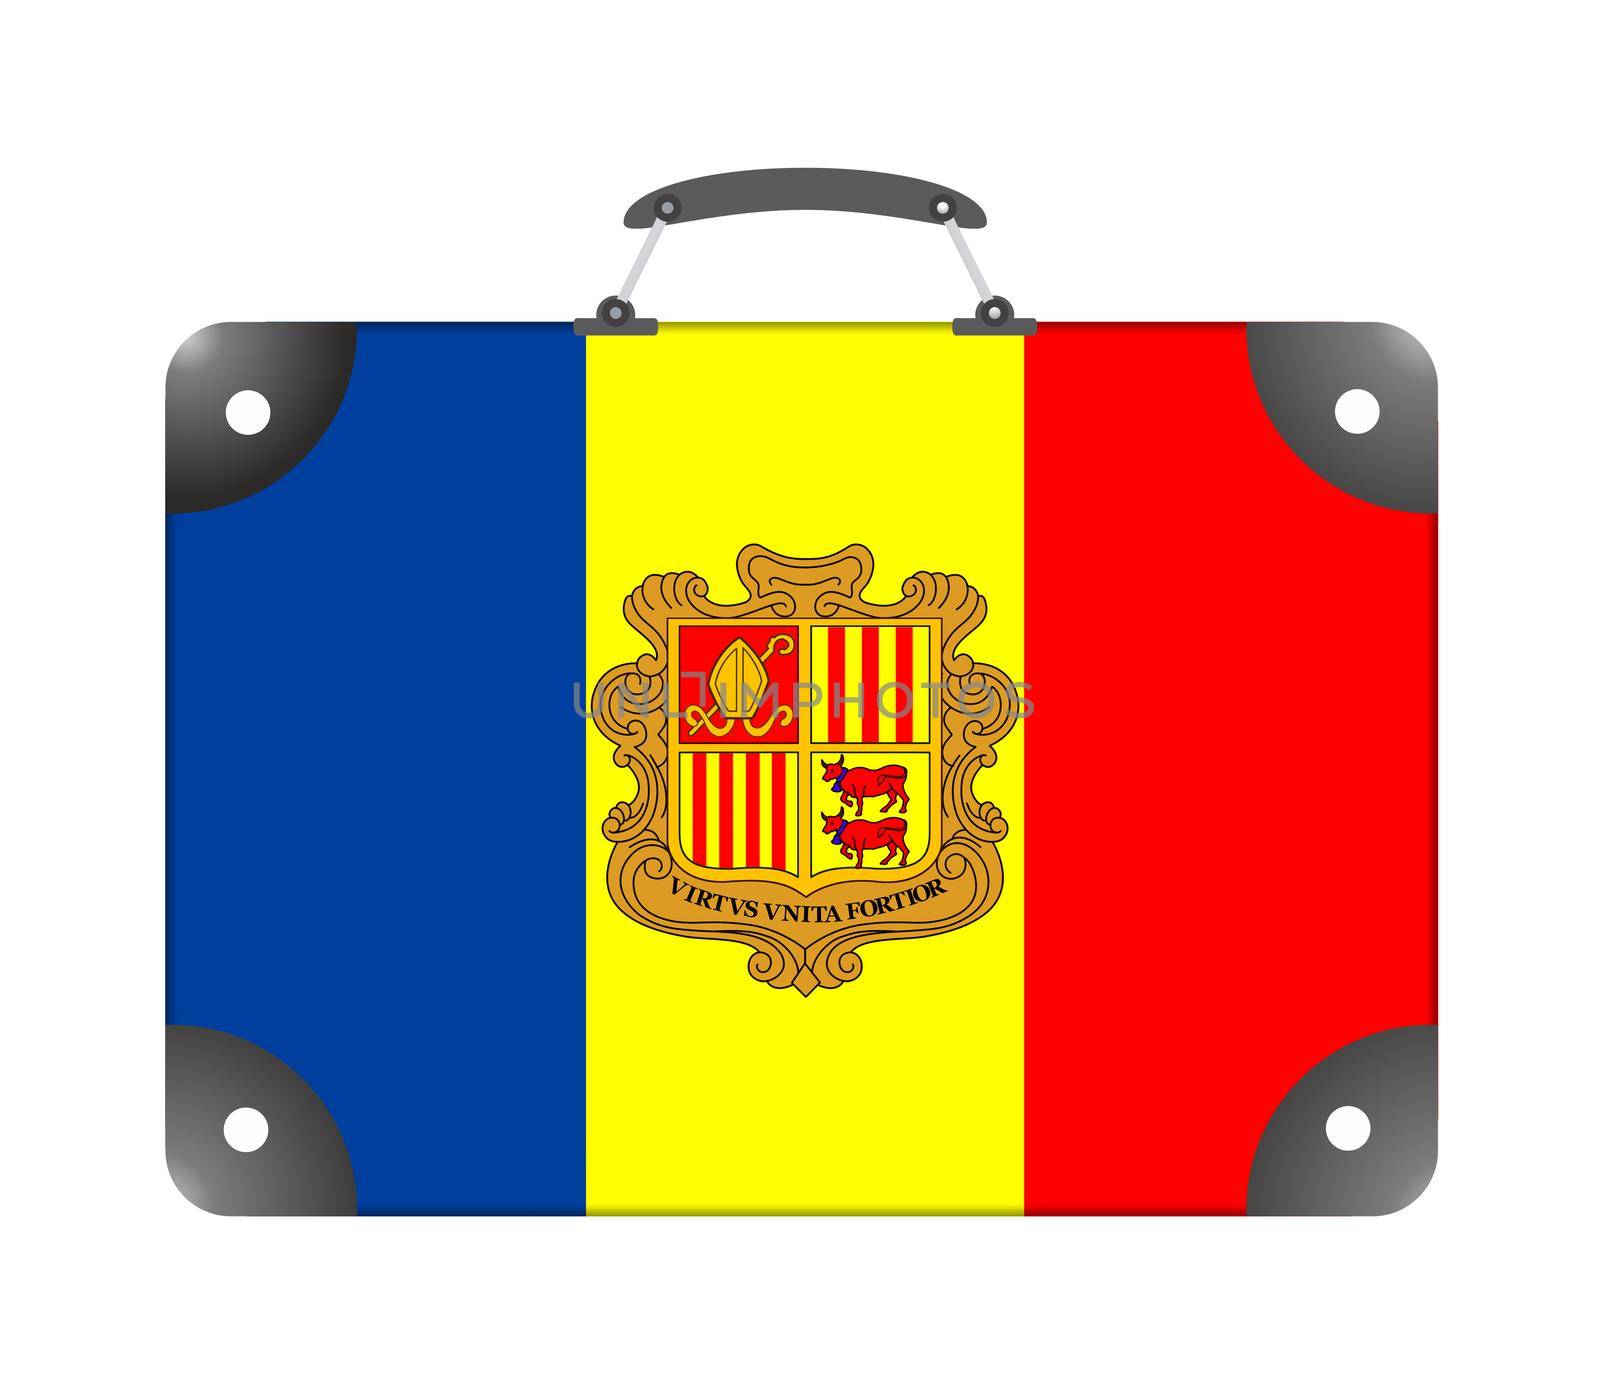 Andorra country flag in the form of a travel suitcase